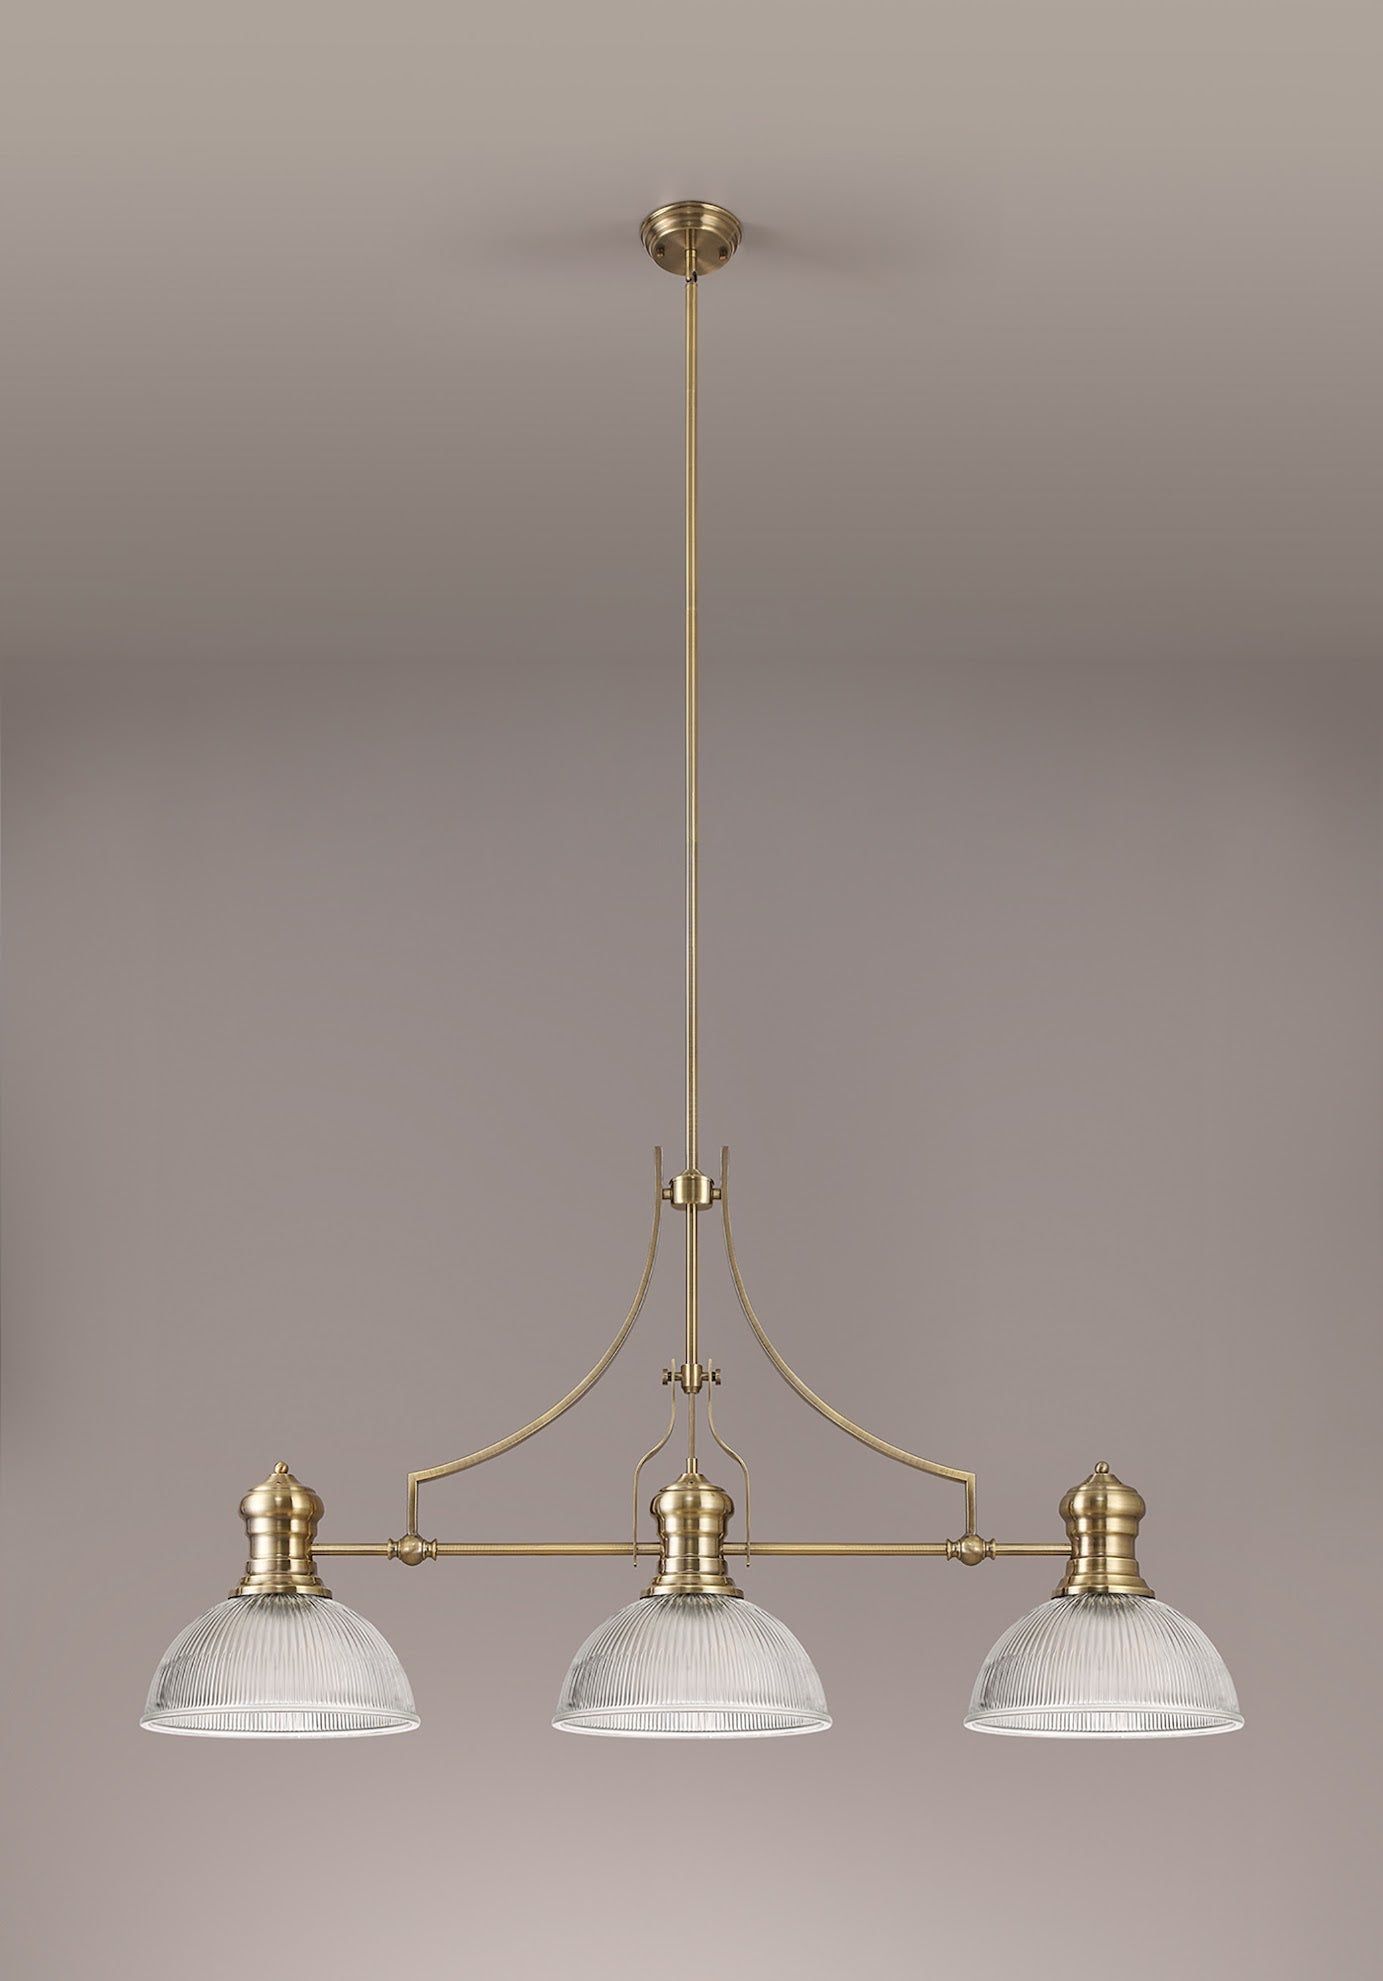 Savannah 3 Light Linear Pendant E27 With 30cm Dome Glass Shade, Antique Brass, Clear